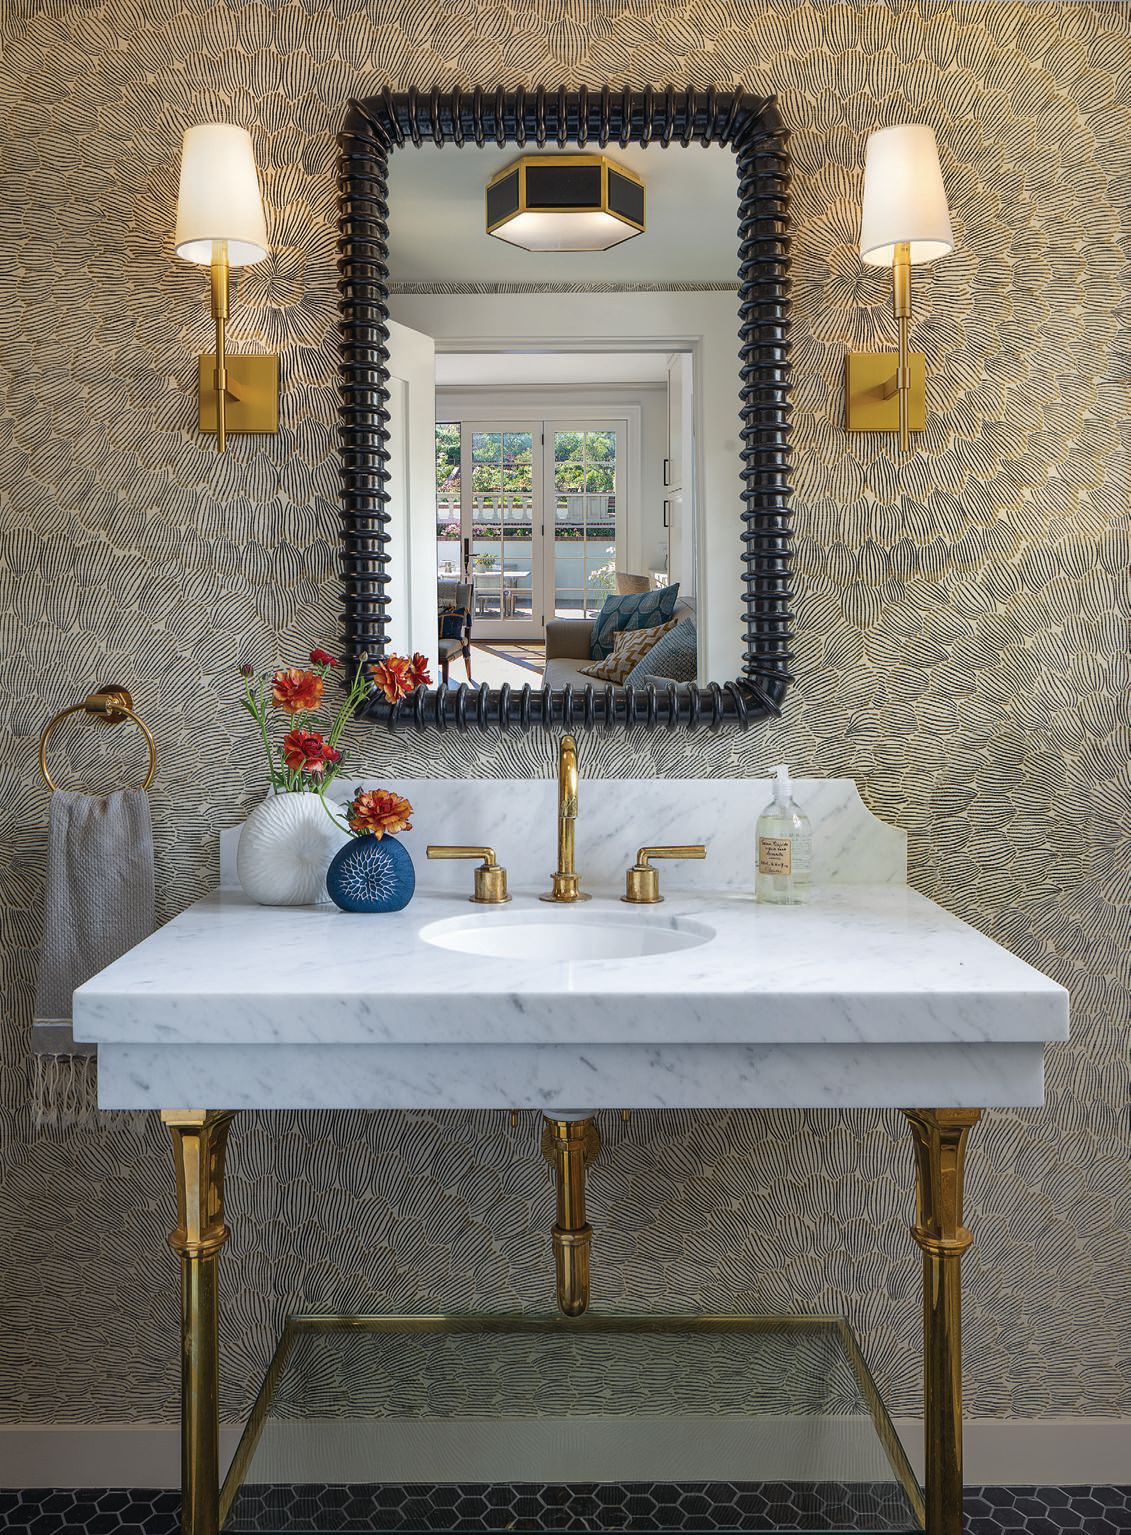 The team from LMB Interiors chose bold hues and jewel tones in a hall bathroom. PHOTOGRAPHED BY PAUL DYER AND TIM COY